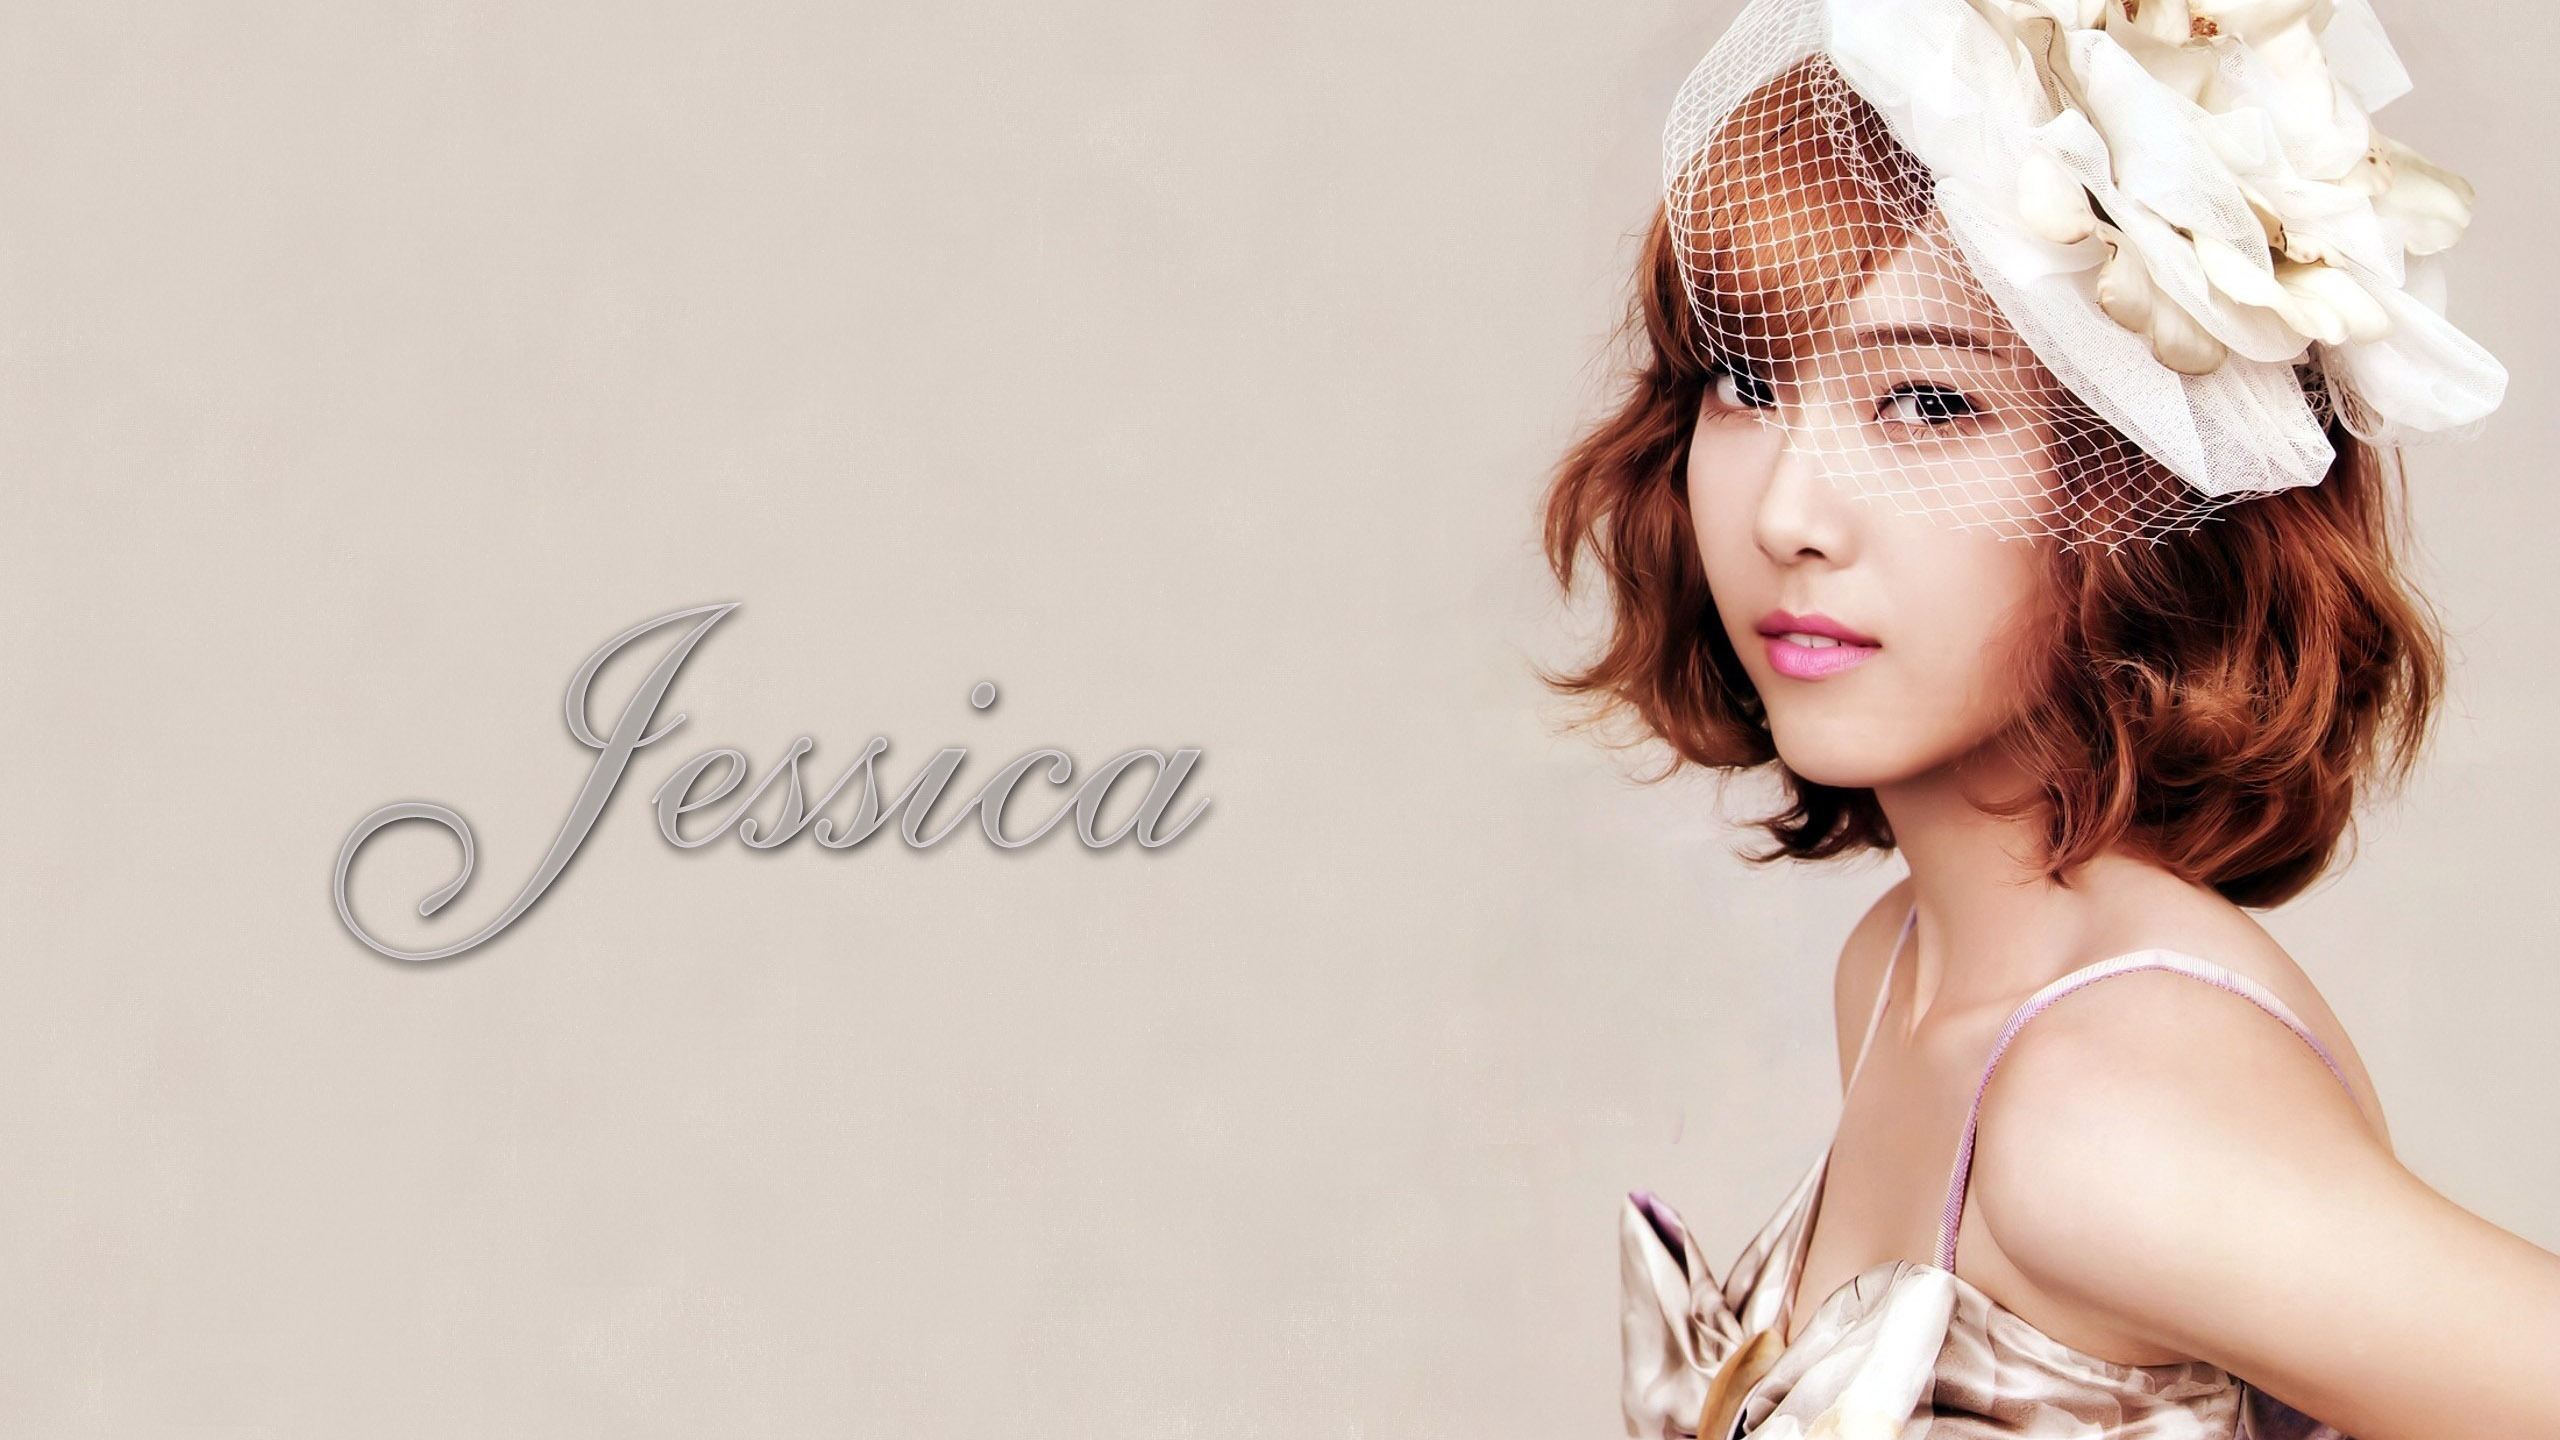 Jessica From Snsd Wallpaper